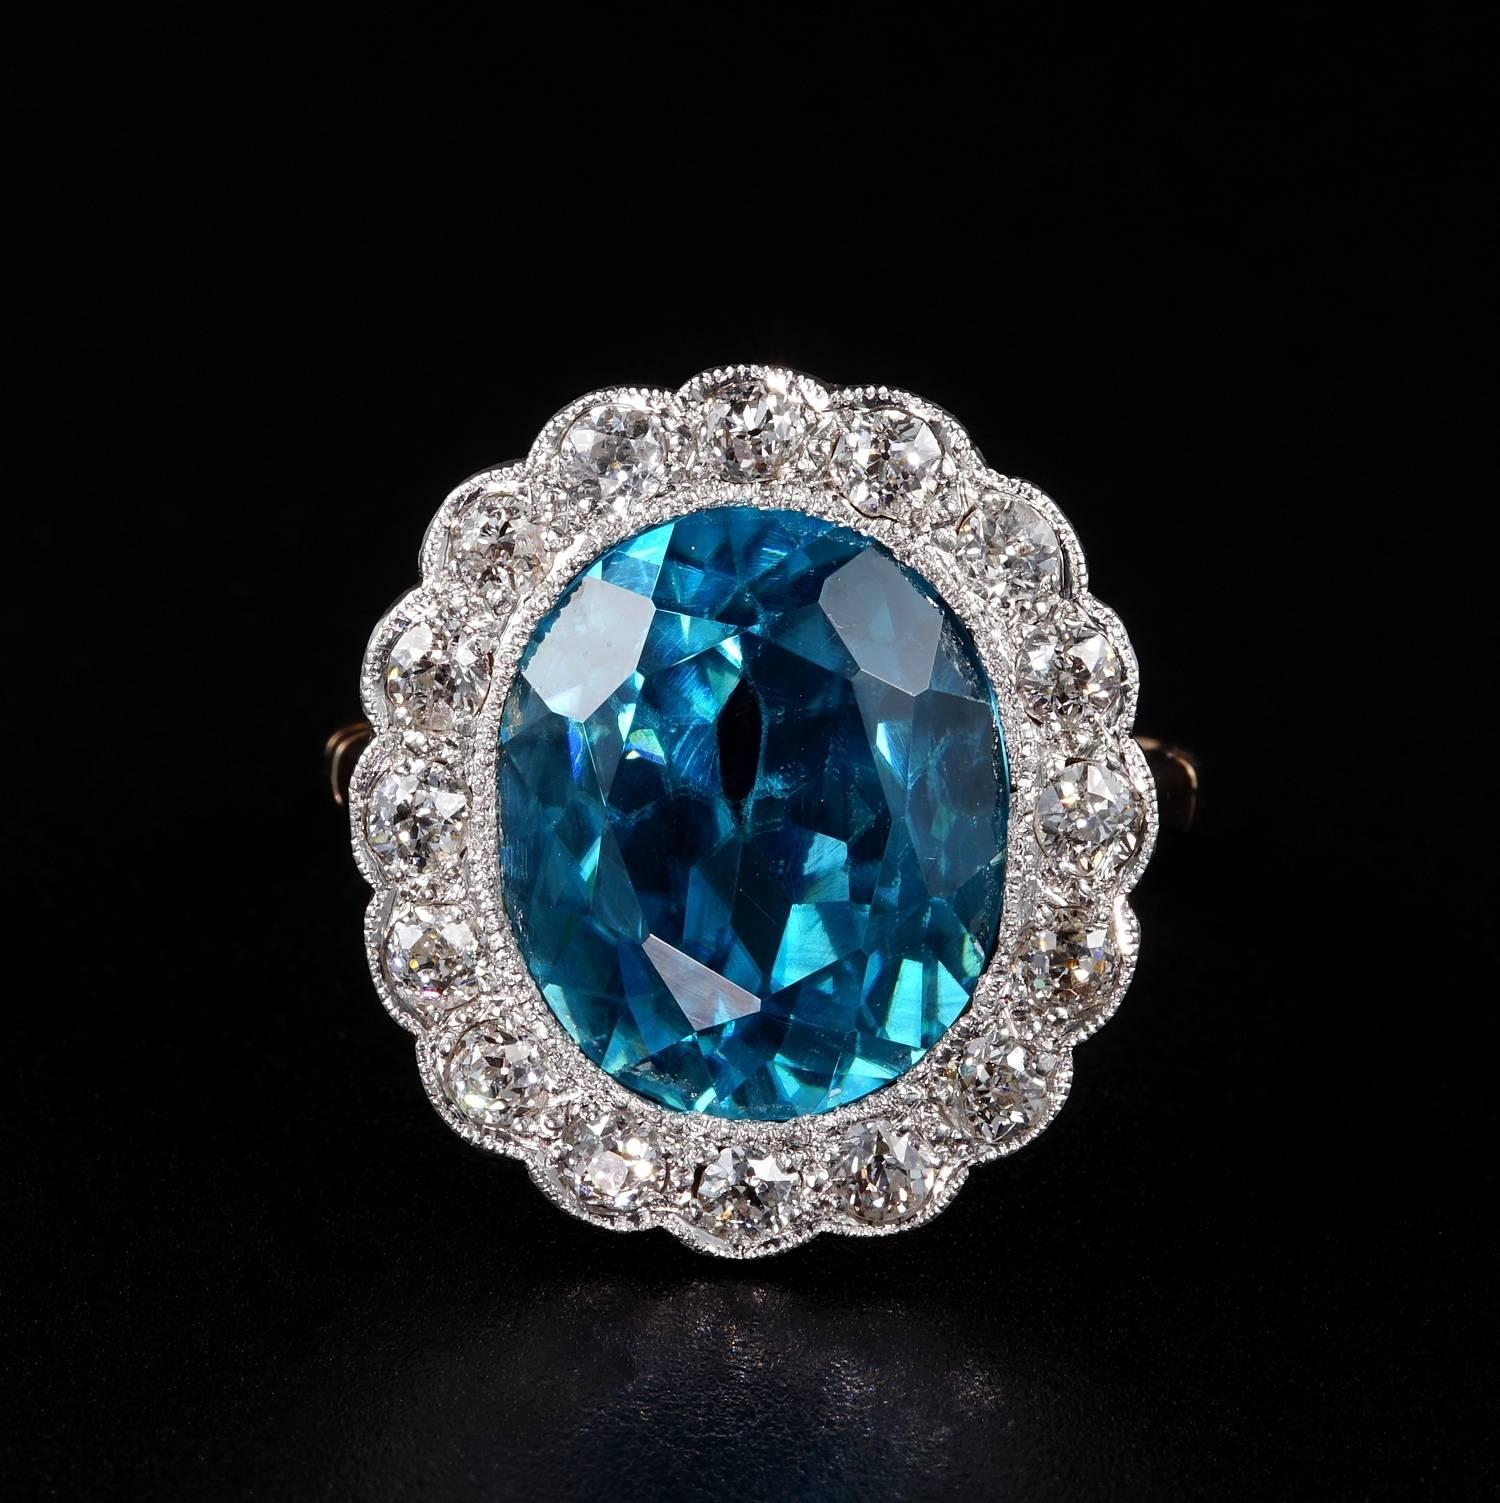 Mesmerezing, rare, top quality ring from the Edwardian period
Boasting an amazing intense vivid Blue Natural, Blue Zircon of 11.05 CT prizing as much brilliance as a Blue Cushion Diamond
This rare Blue Zircon for size colour and quality will stand